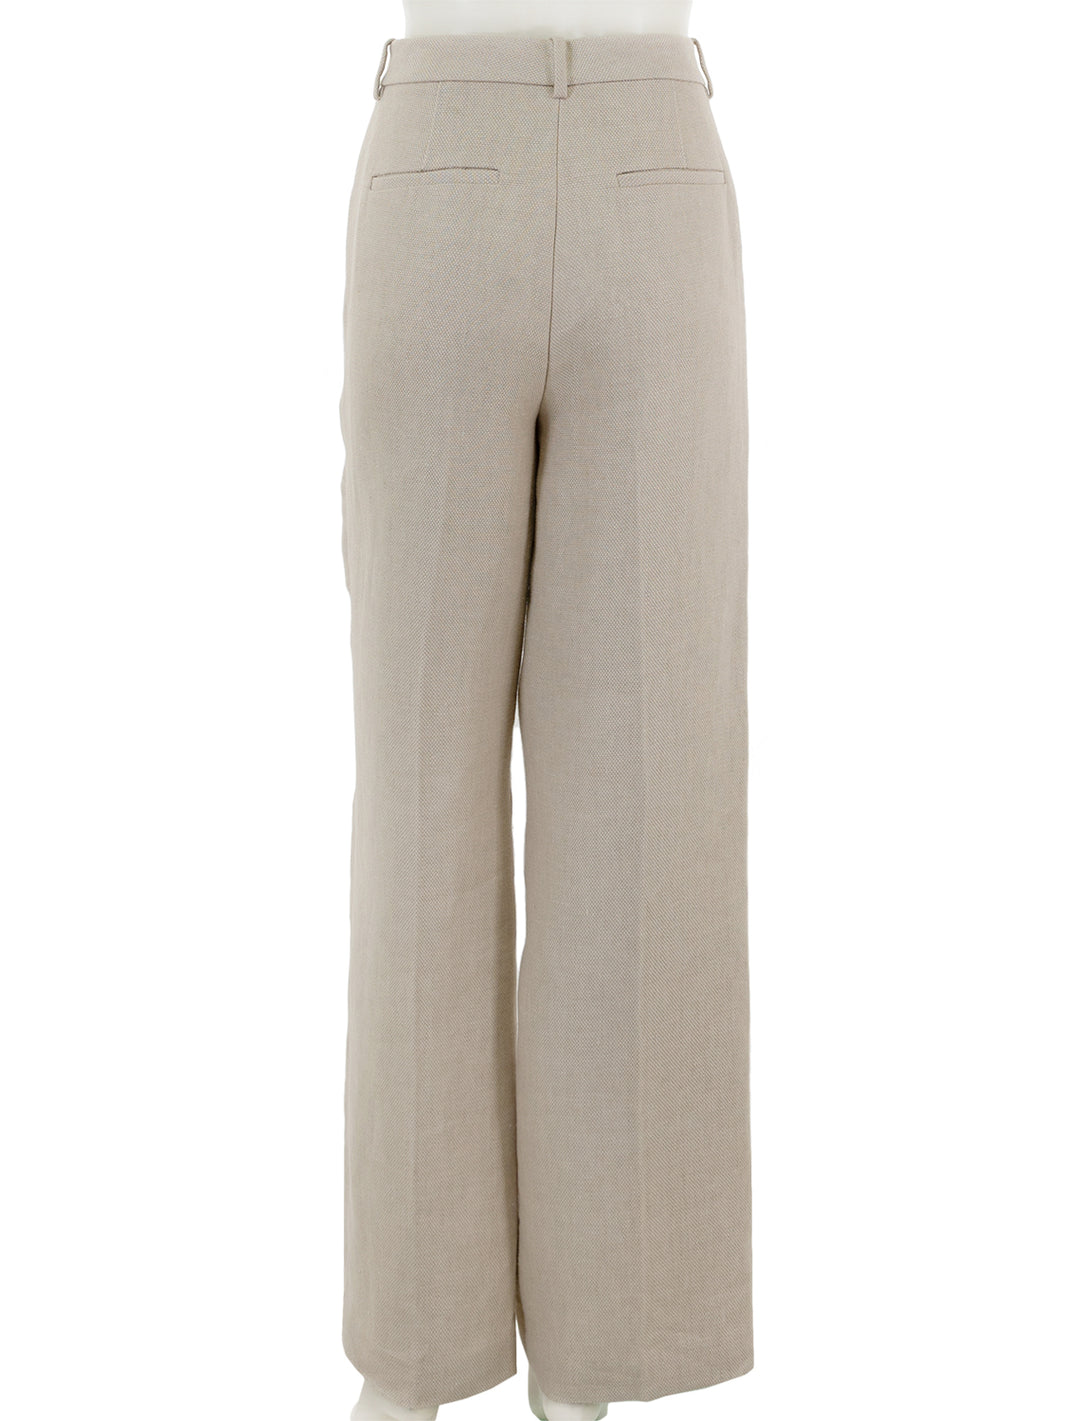 Back view of Theory's clean trouser in straw basketweave linen.